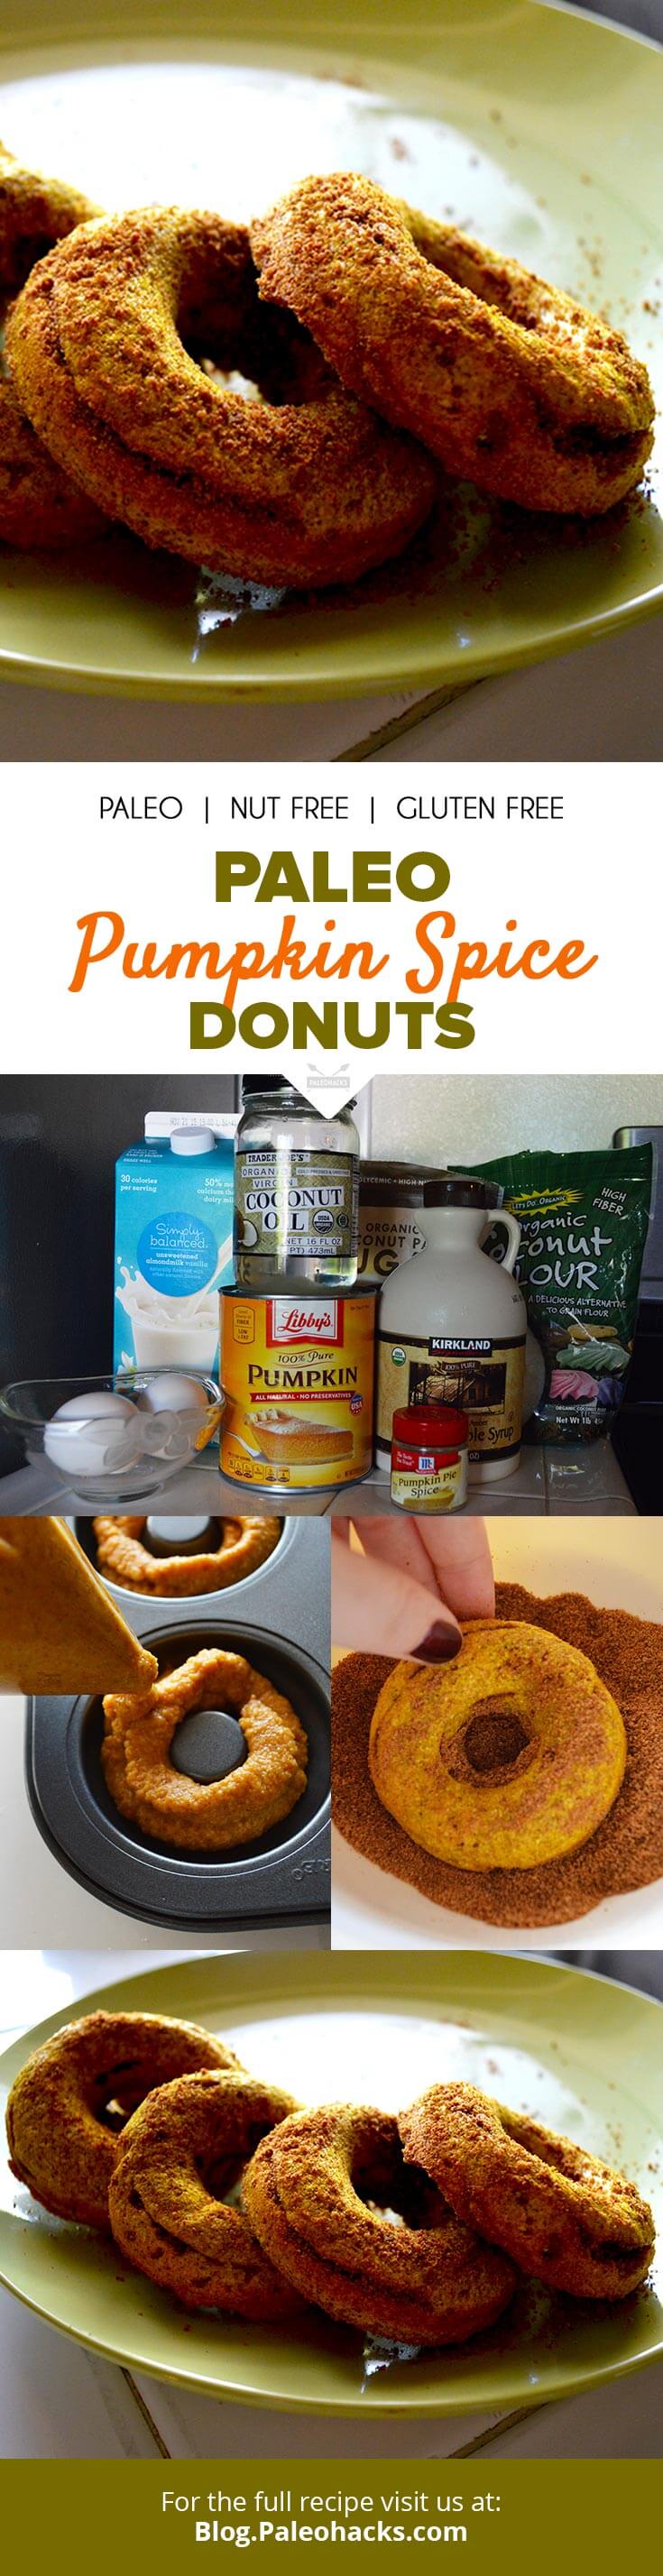 Dunk these donuts into your morning coffee for an autumn treat you can enjoy anytime of the year!